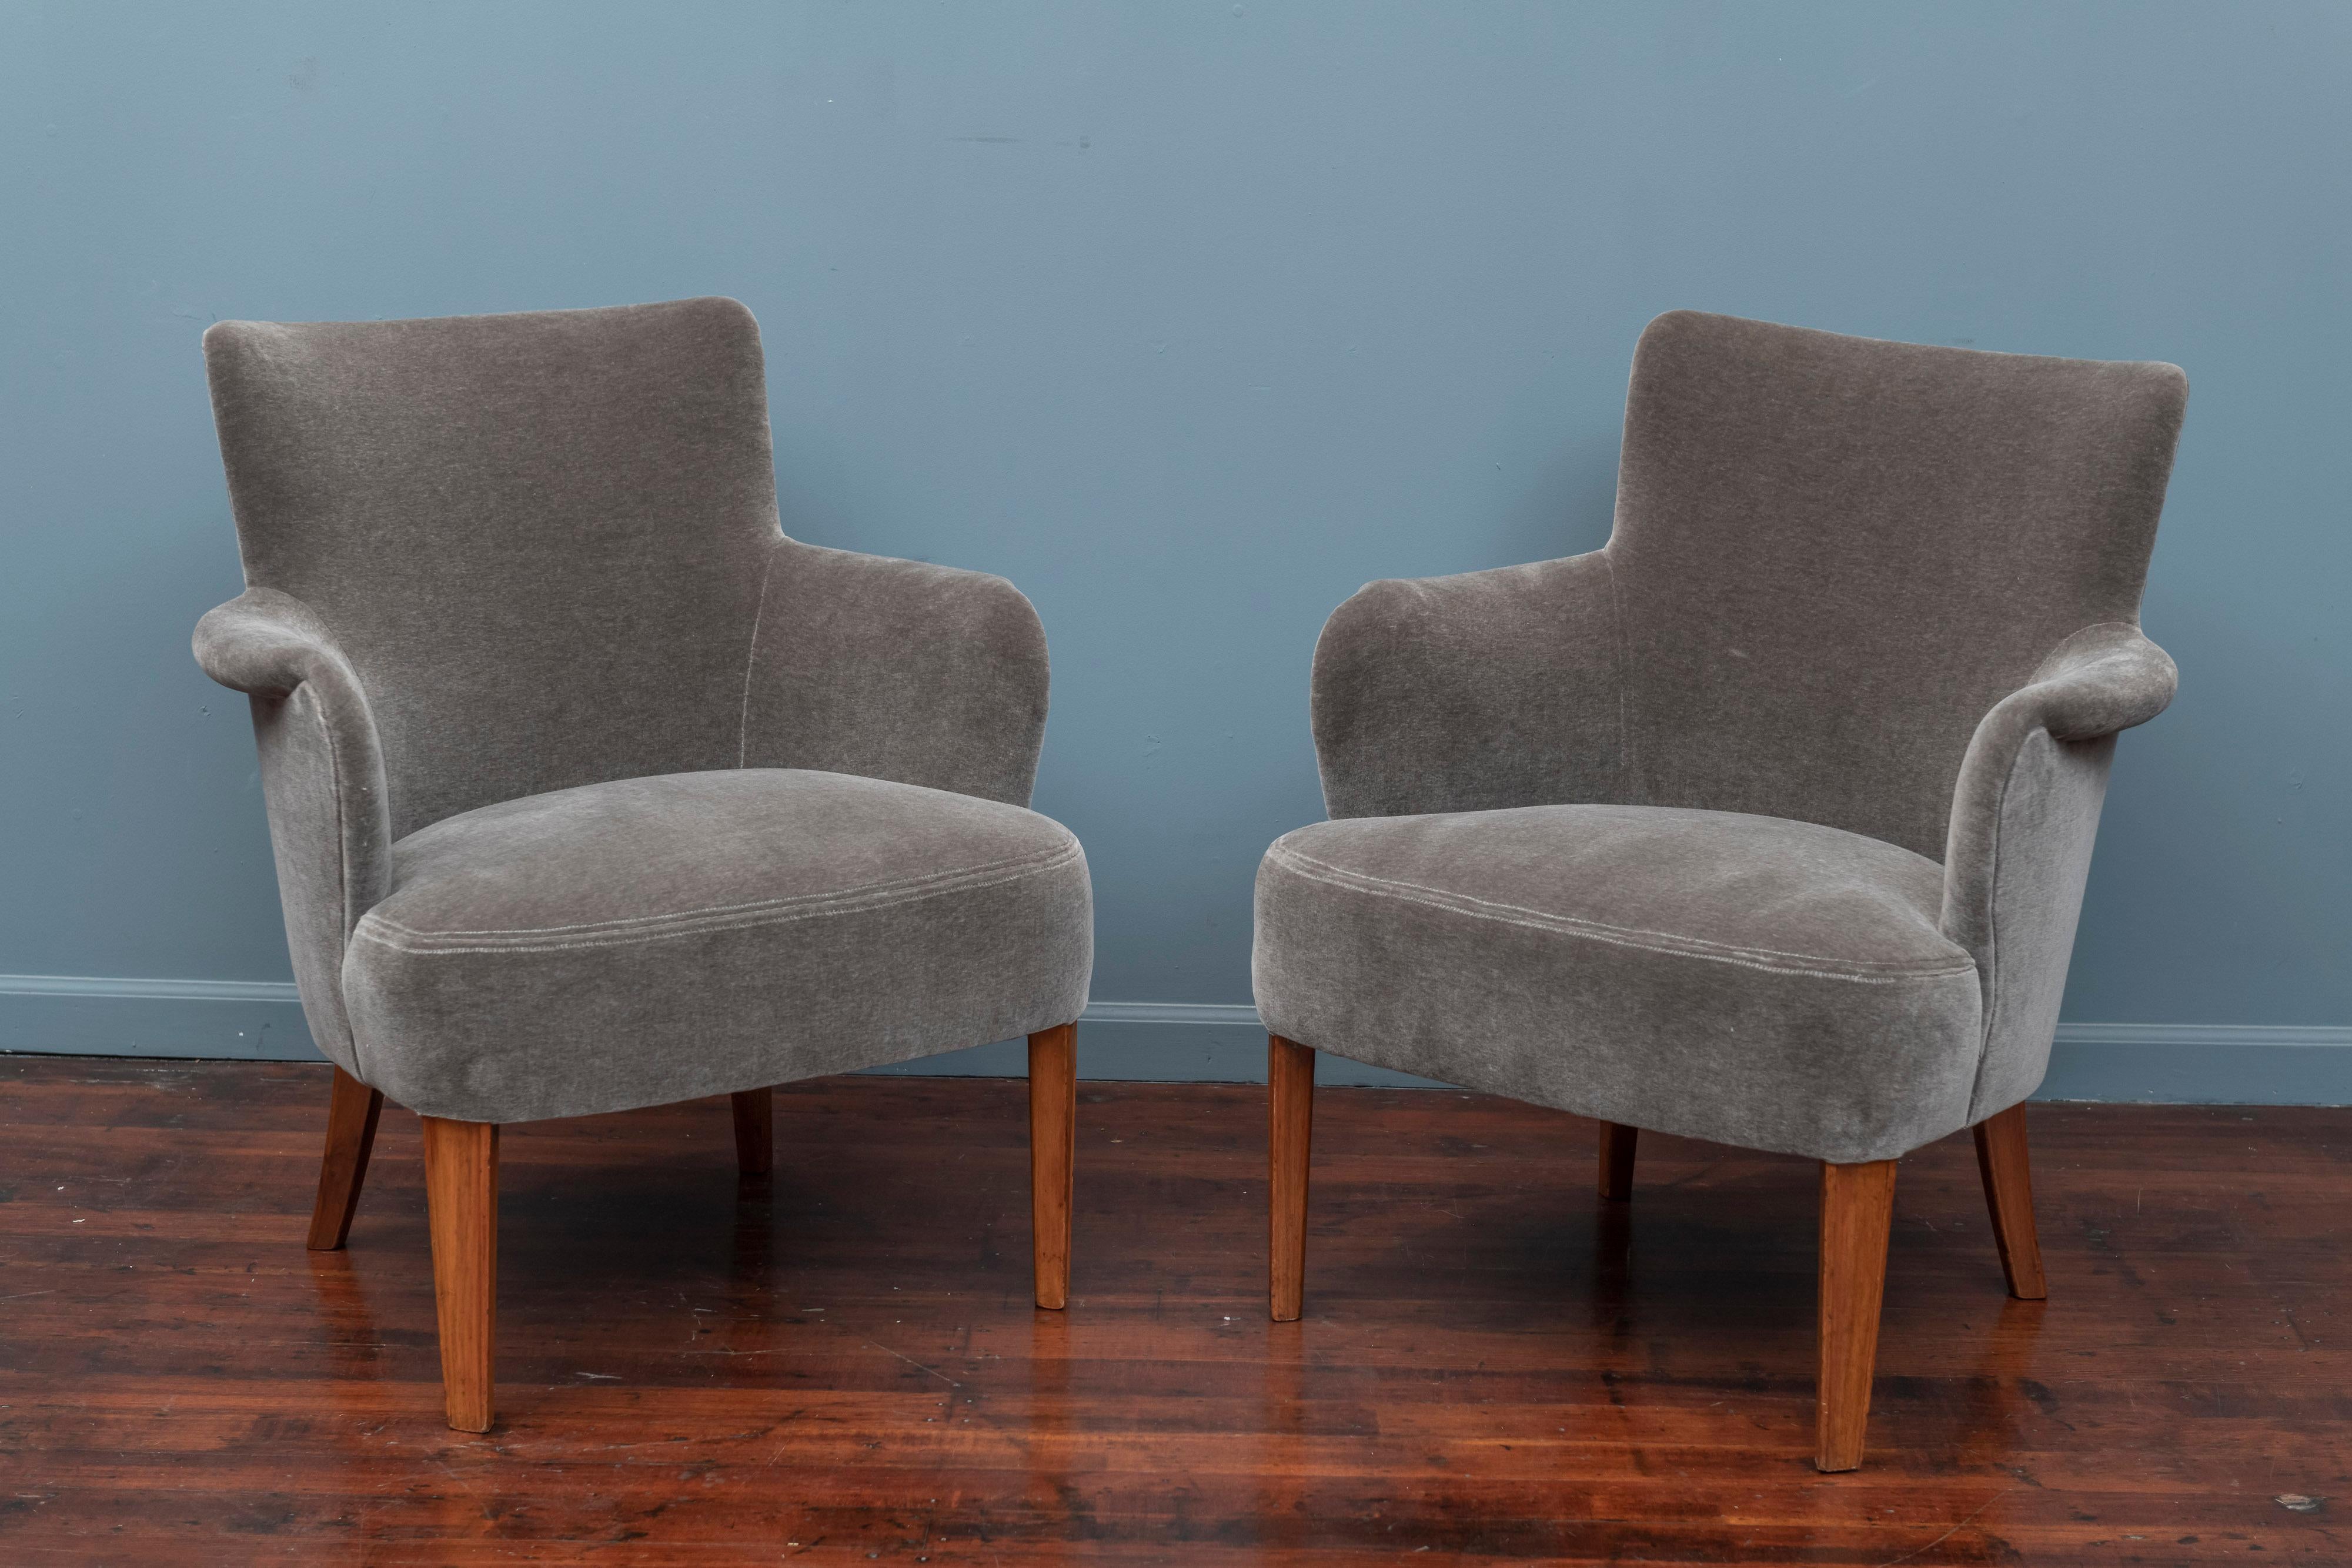 Mid-Century Modern Swedish lounge chairs in the style of Carl Malmsten, newly upholstered in charcoal grey mohair and ready to enjoy.